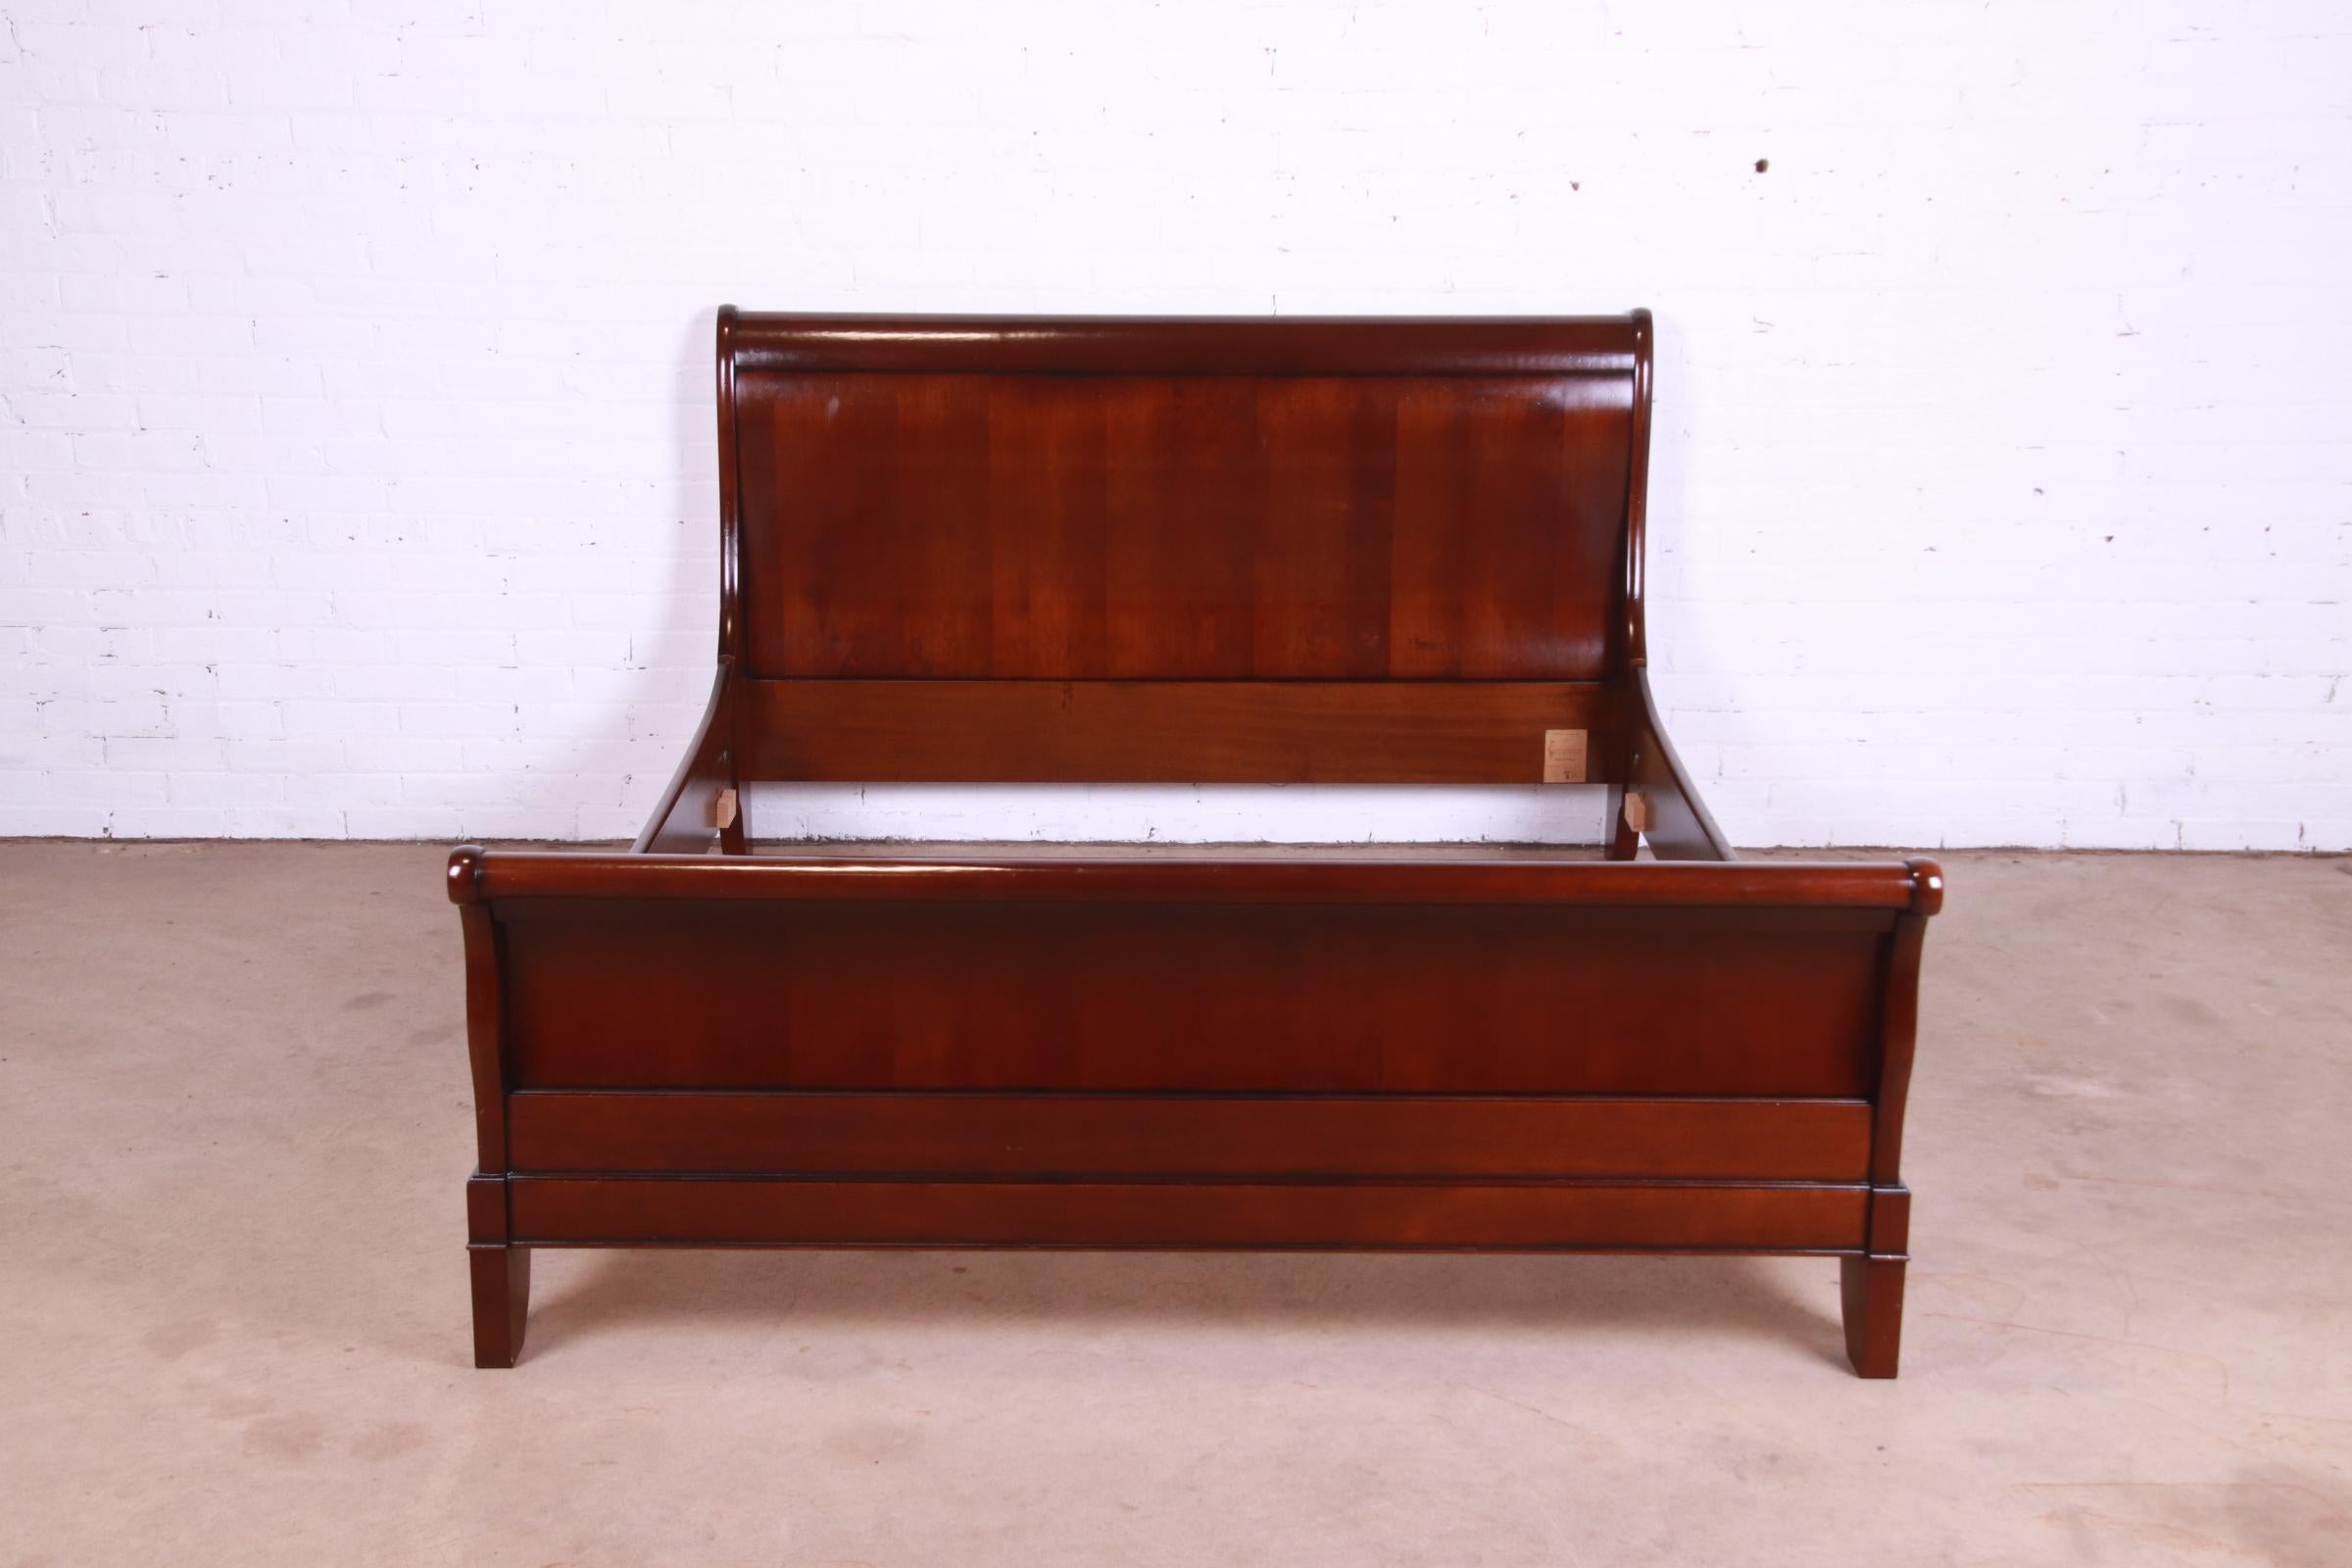 sleigh bed cherry wood